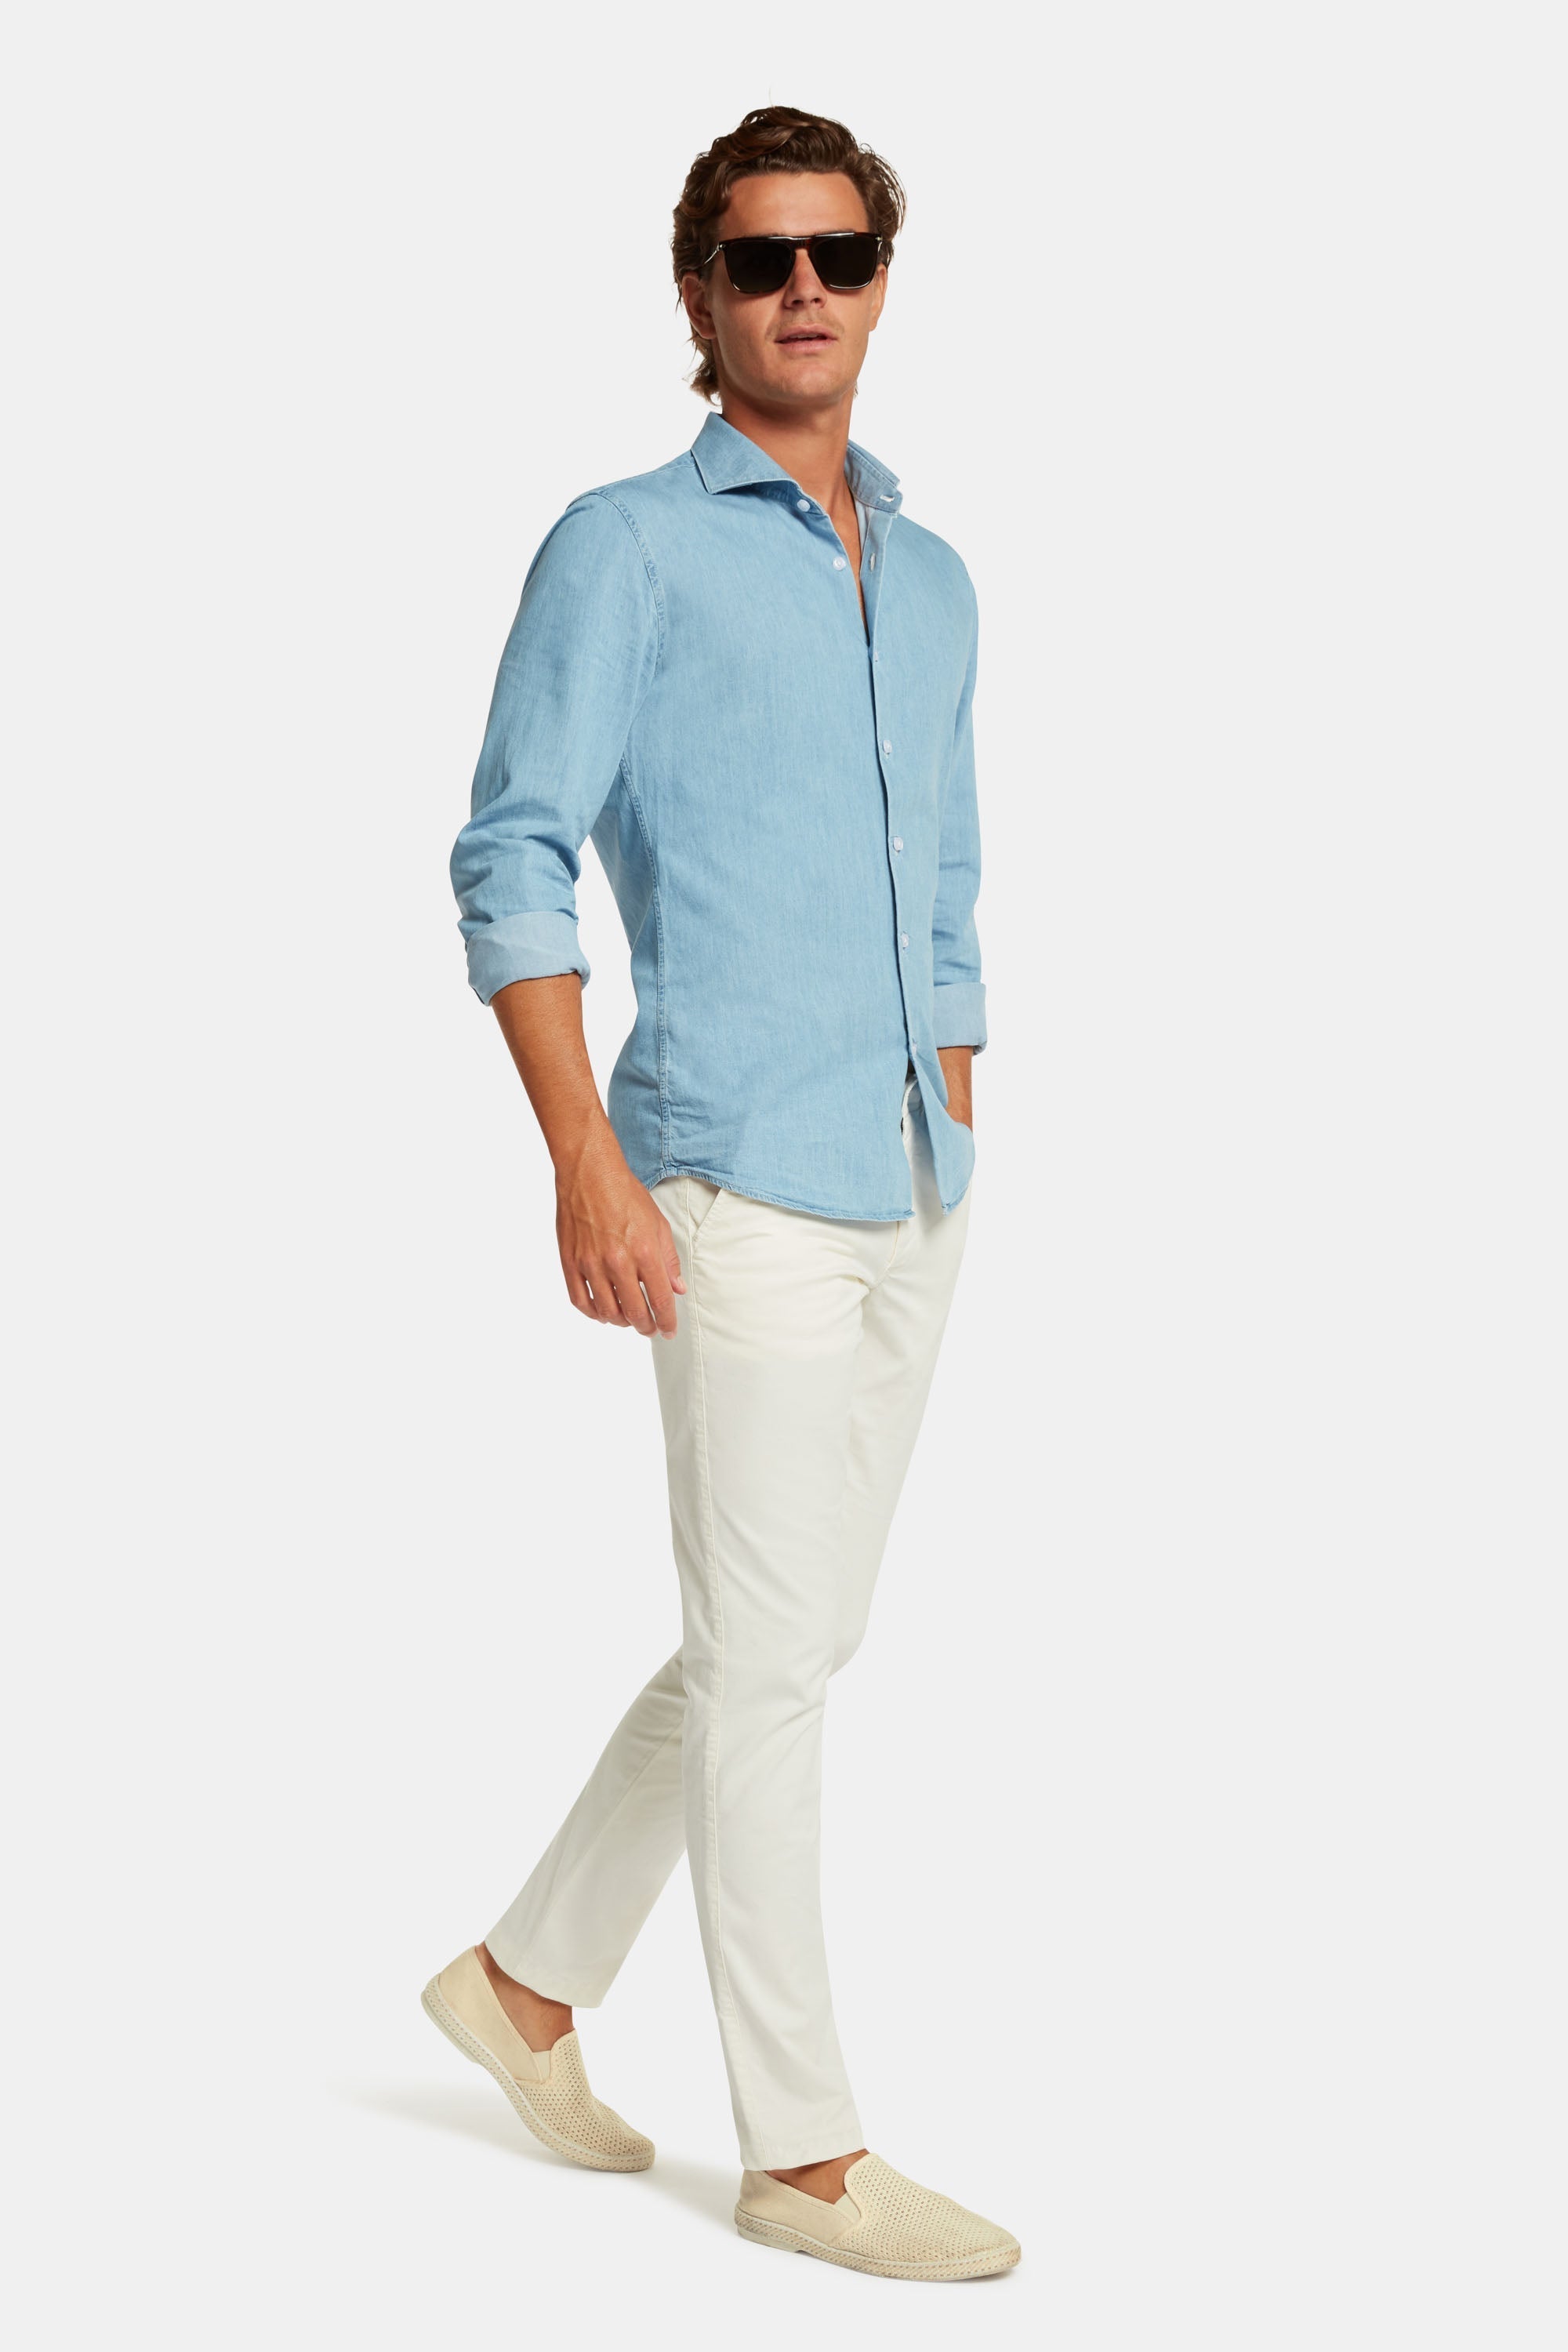 Coconuts | Men's Off White Chinos | MR MARVIS